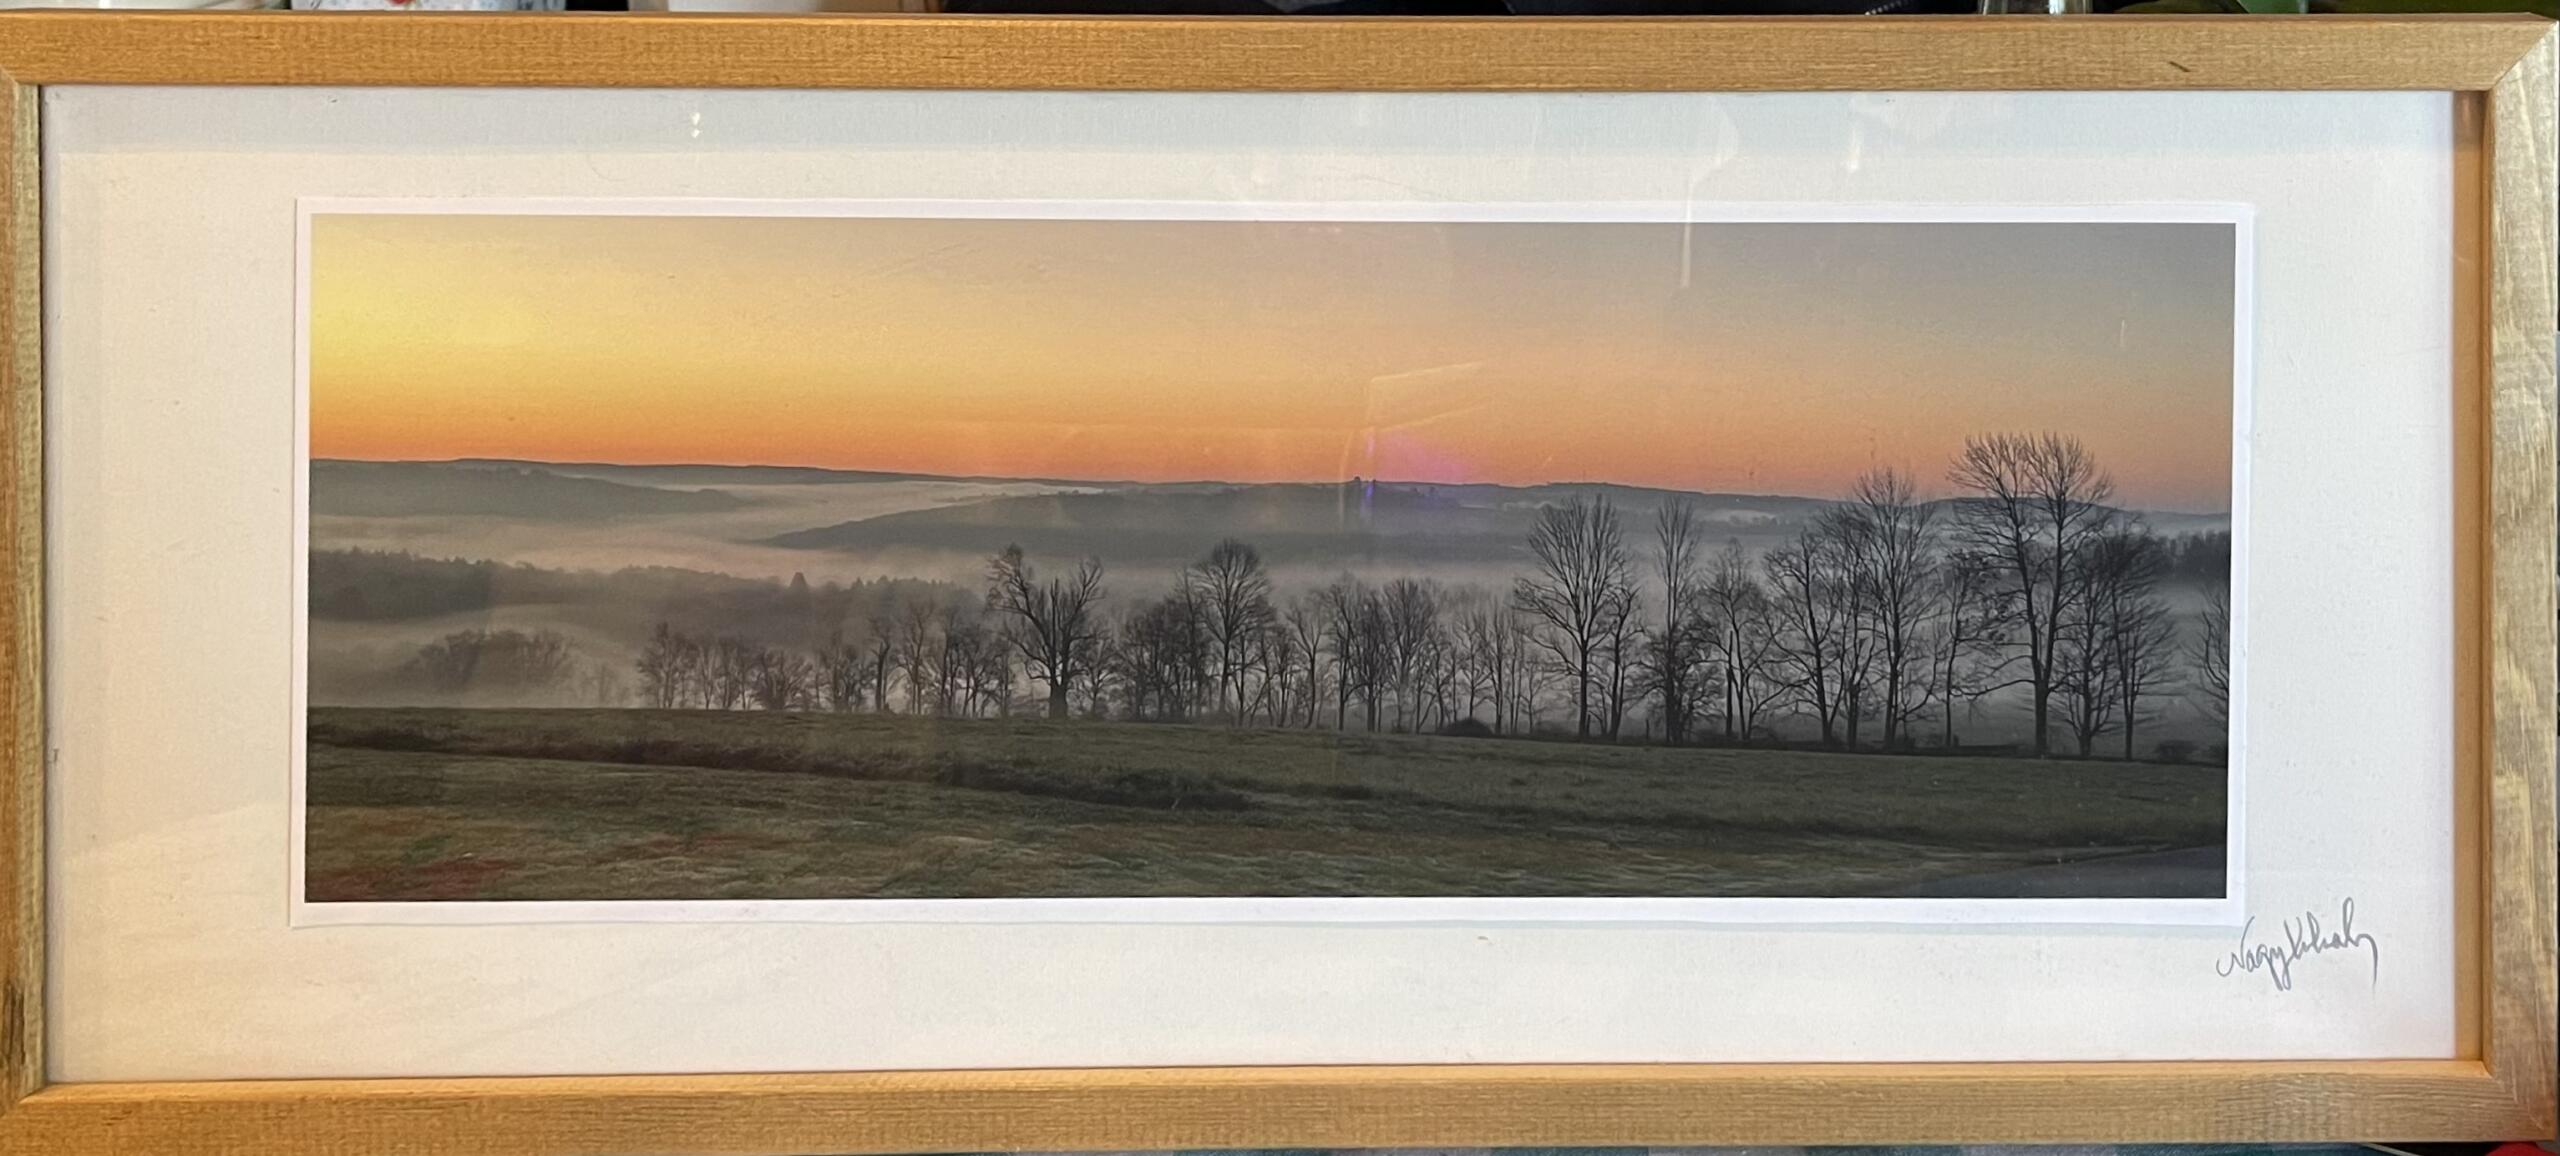 "Morning landscape" in a white matte and thin, light wood frame.